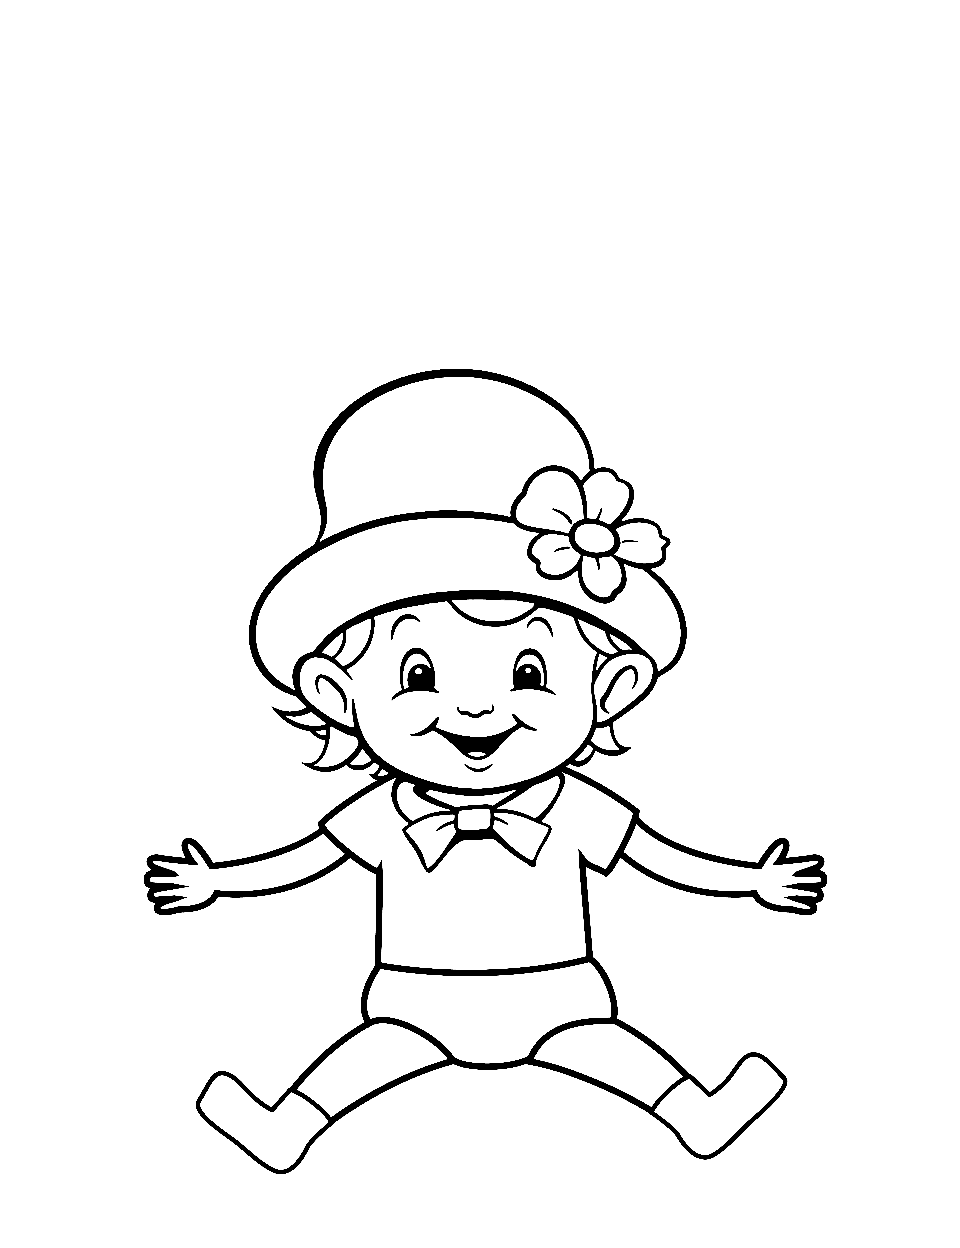 Baby Wearing Leprechaun Hat Coloring Page - A laughing baby wearing a cute leprechaun hat.